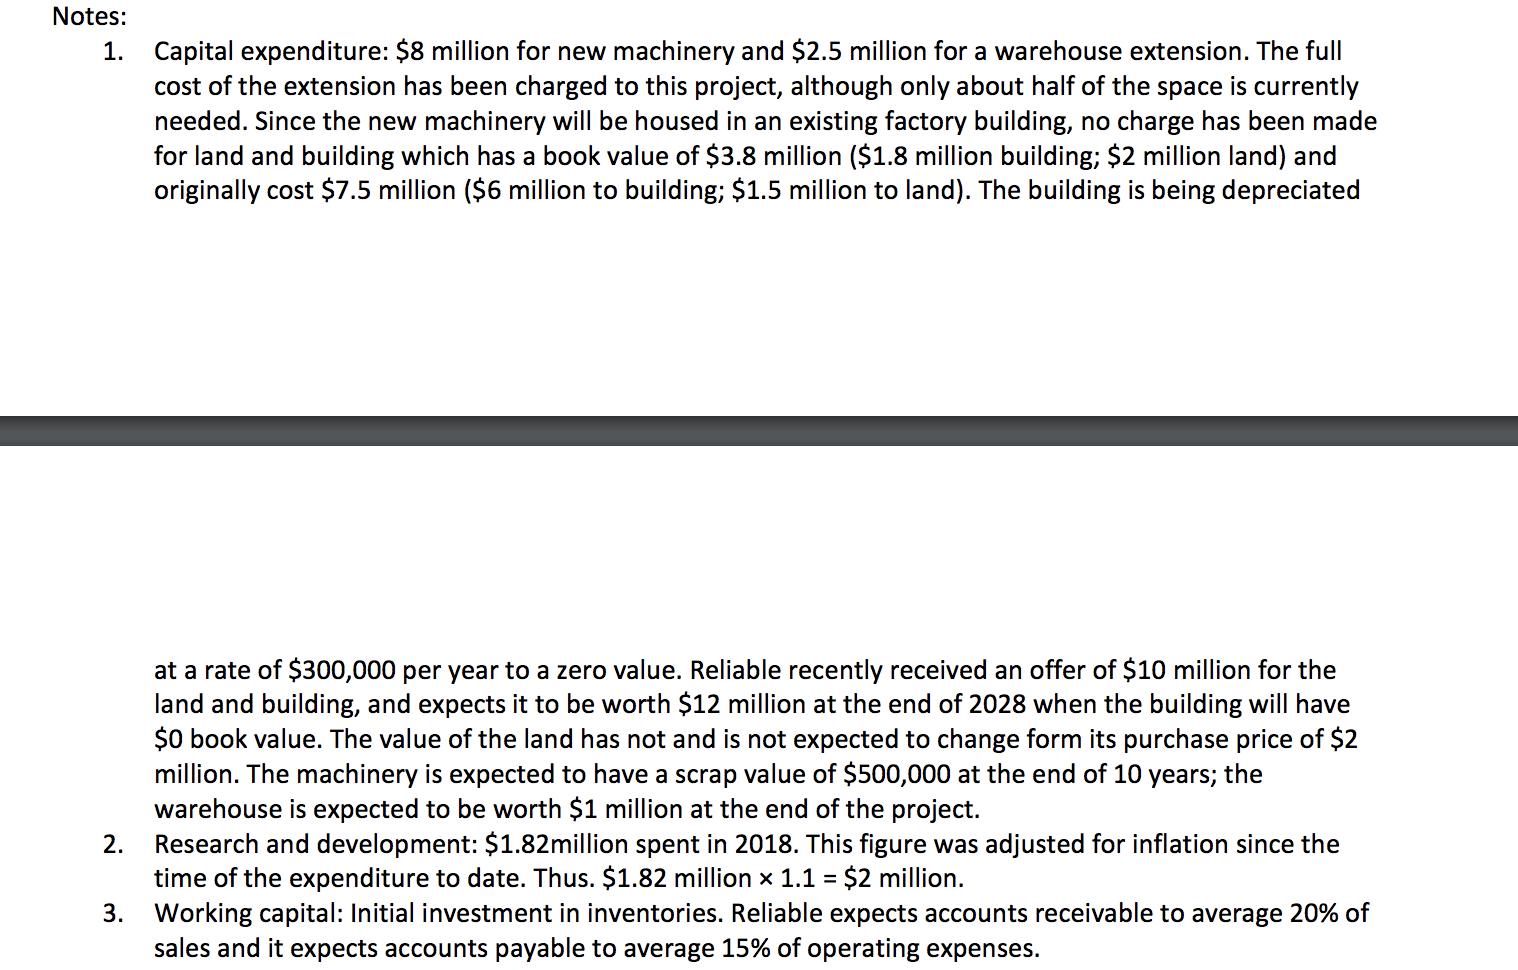 Notes: Capital expenditure: $8 million for new machinery and $2.5 million for a warehouse extension. The full cost of the ext